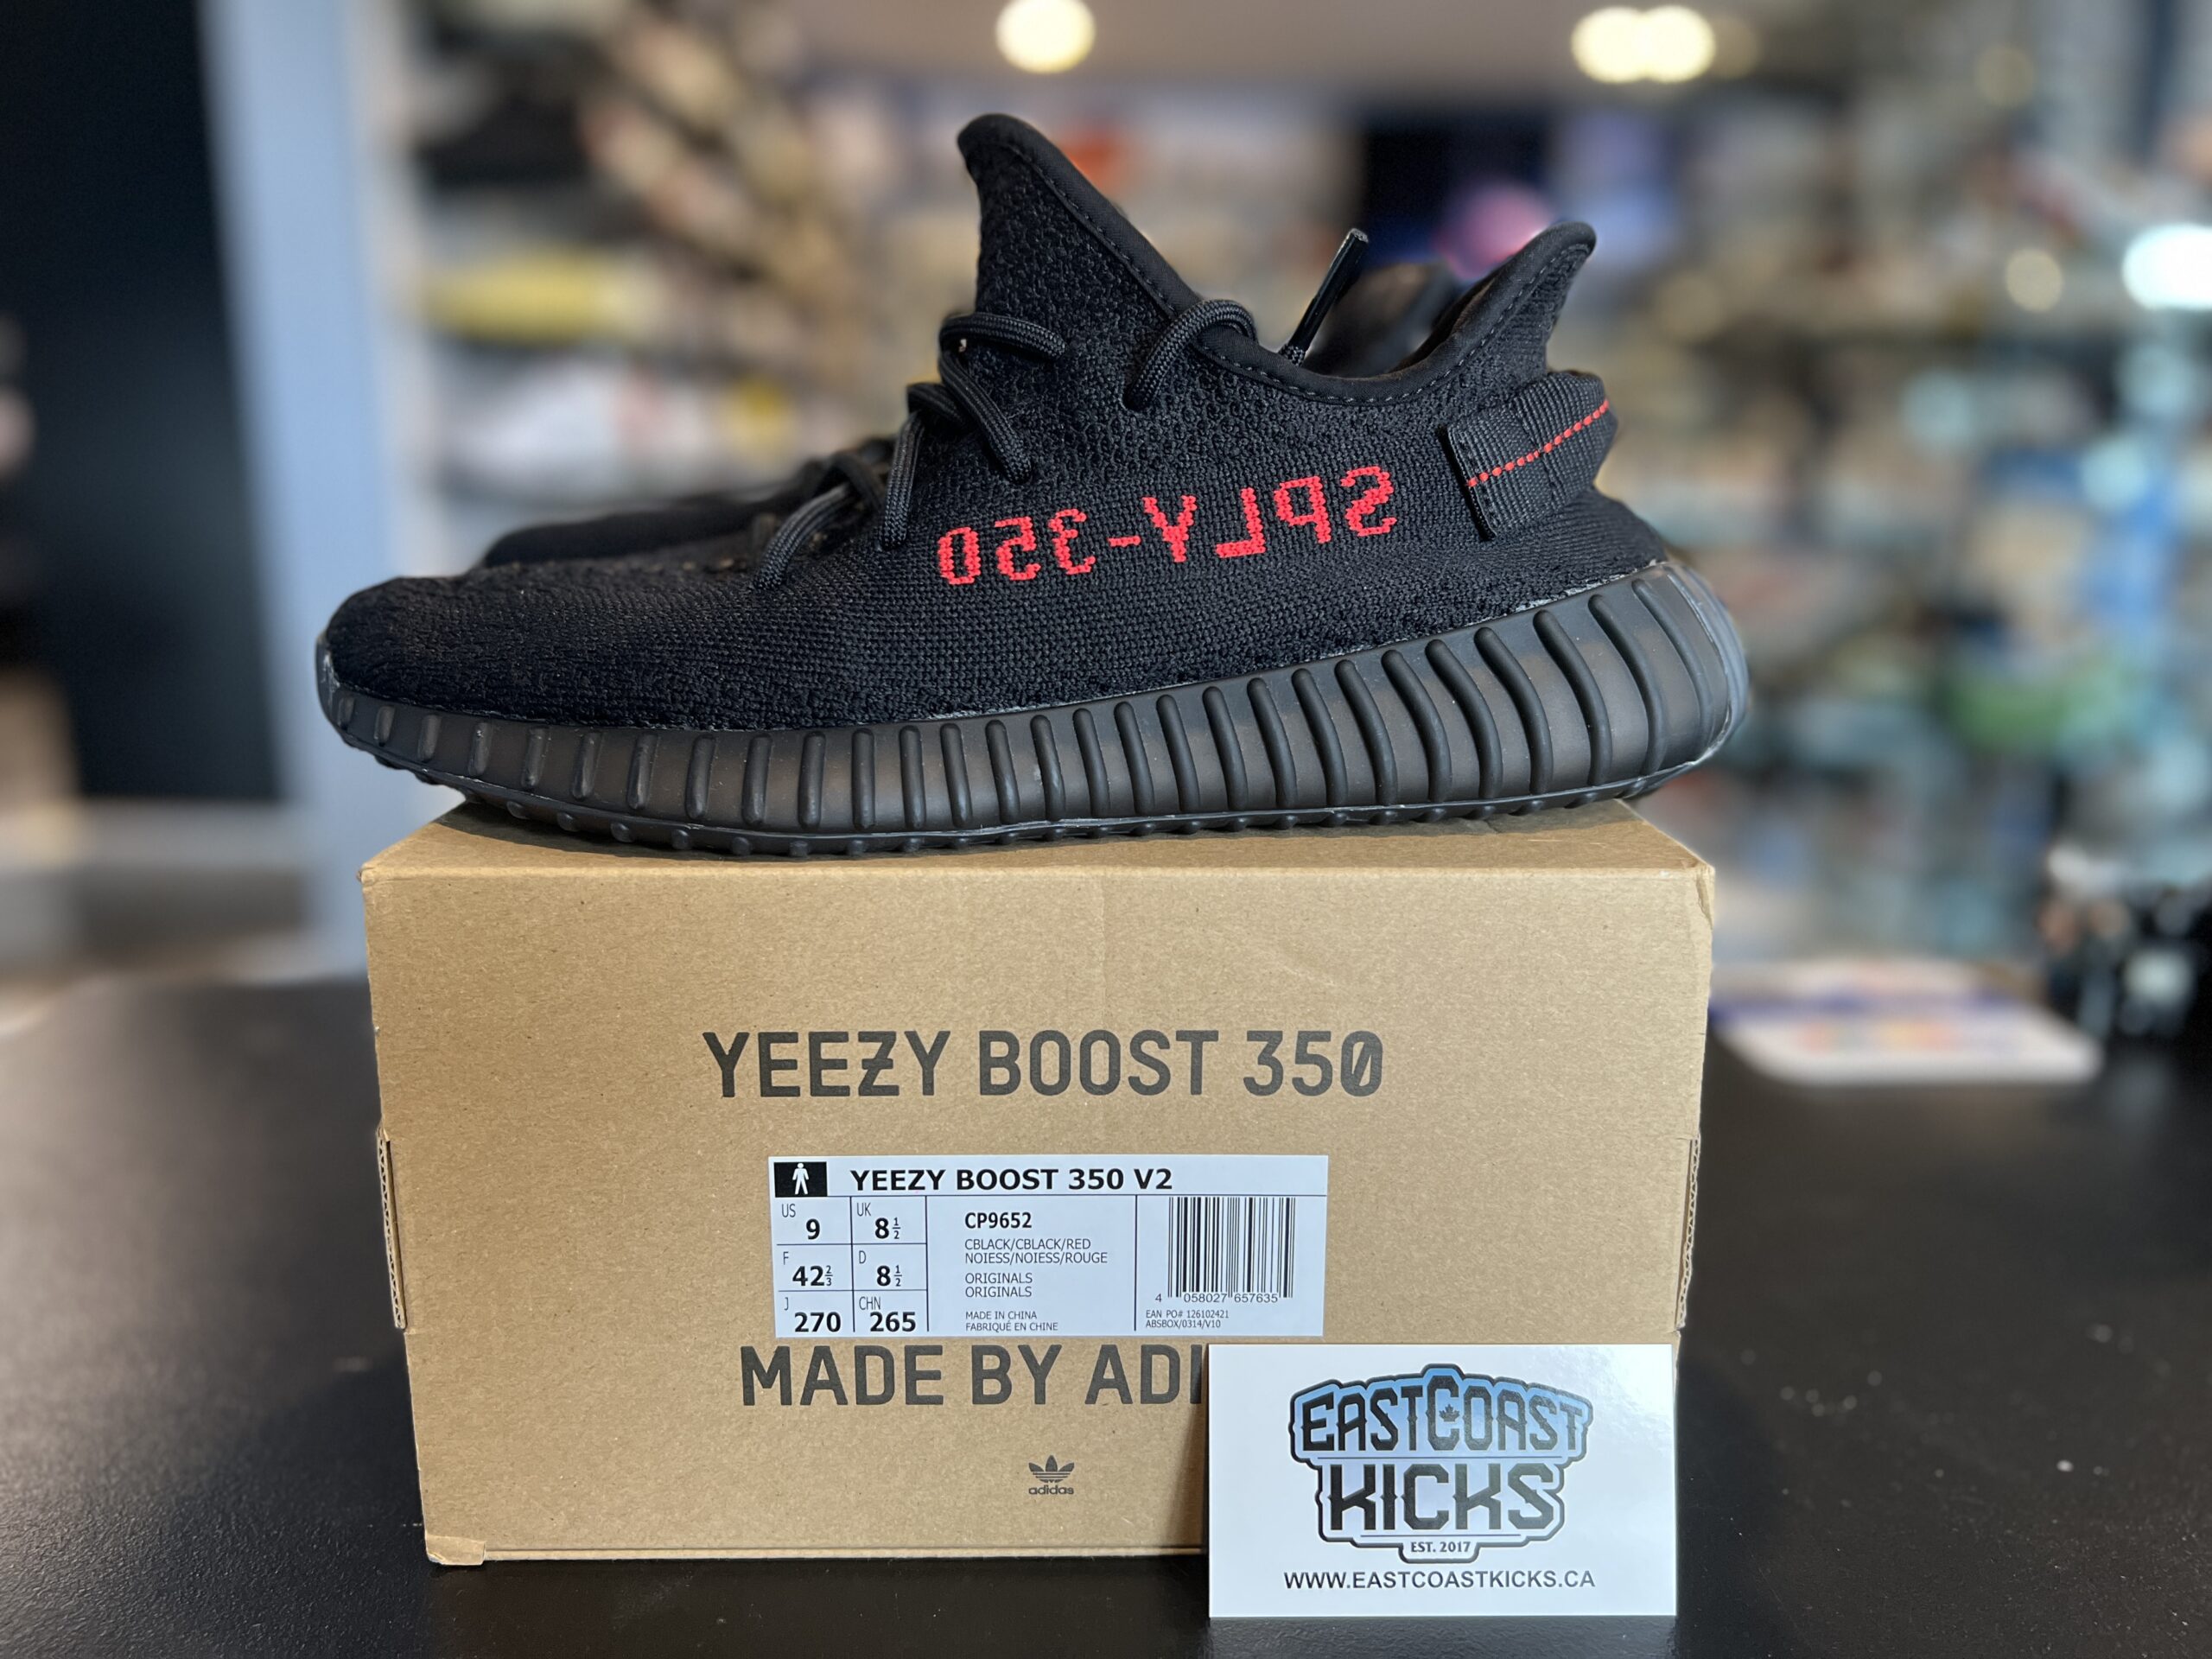 Preowned Adidas Yeezy Boost 350 V2 Black Red Size 9